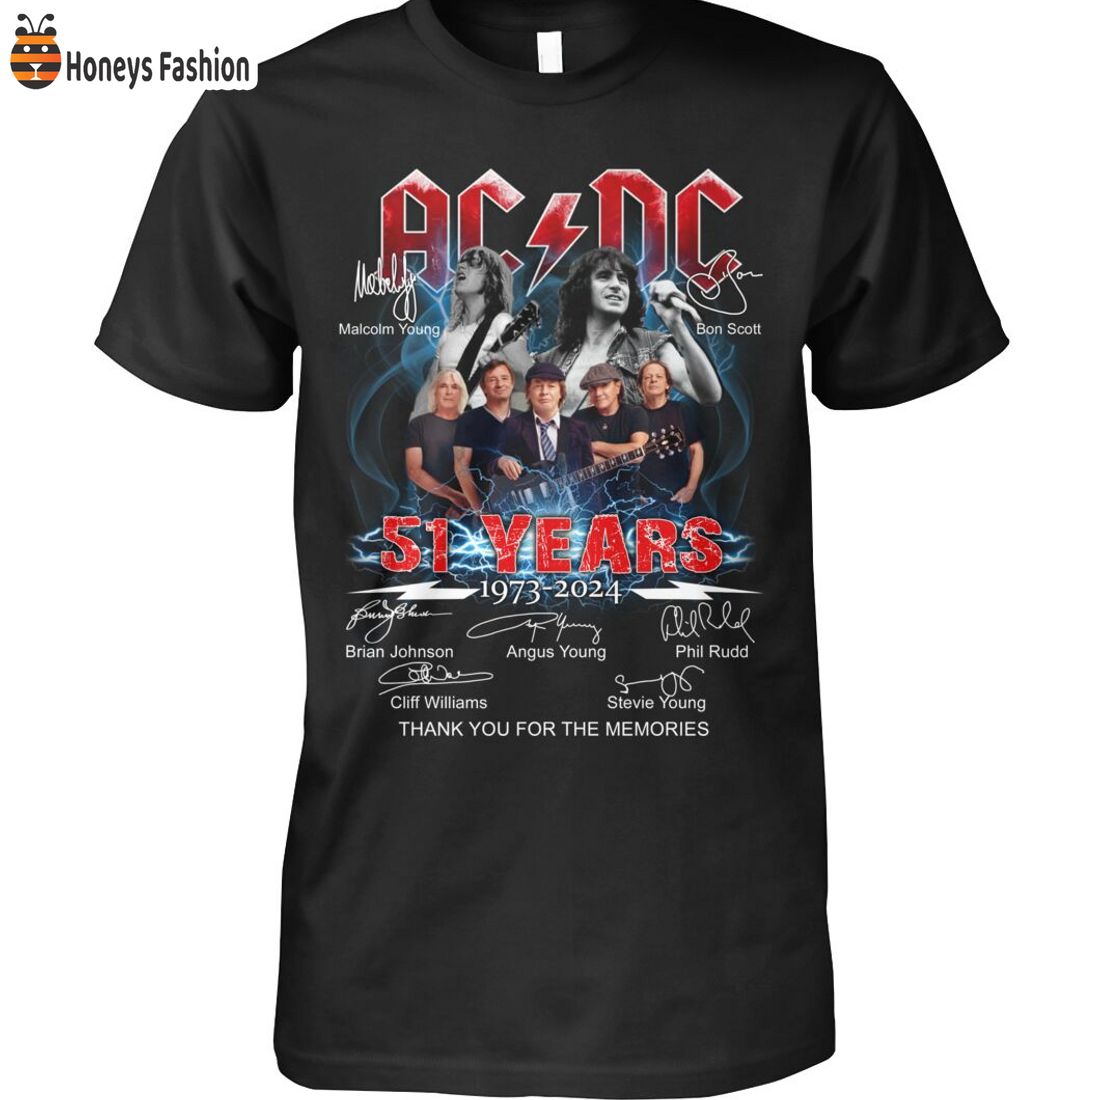 BEST SELLER Acdc 51 Years Thank You For The Memories Shirt